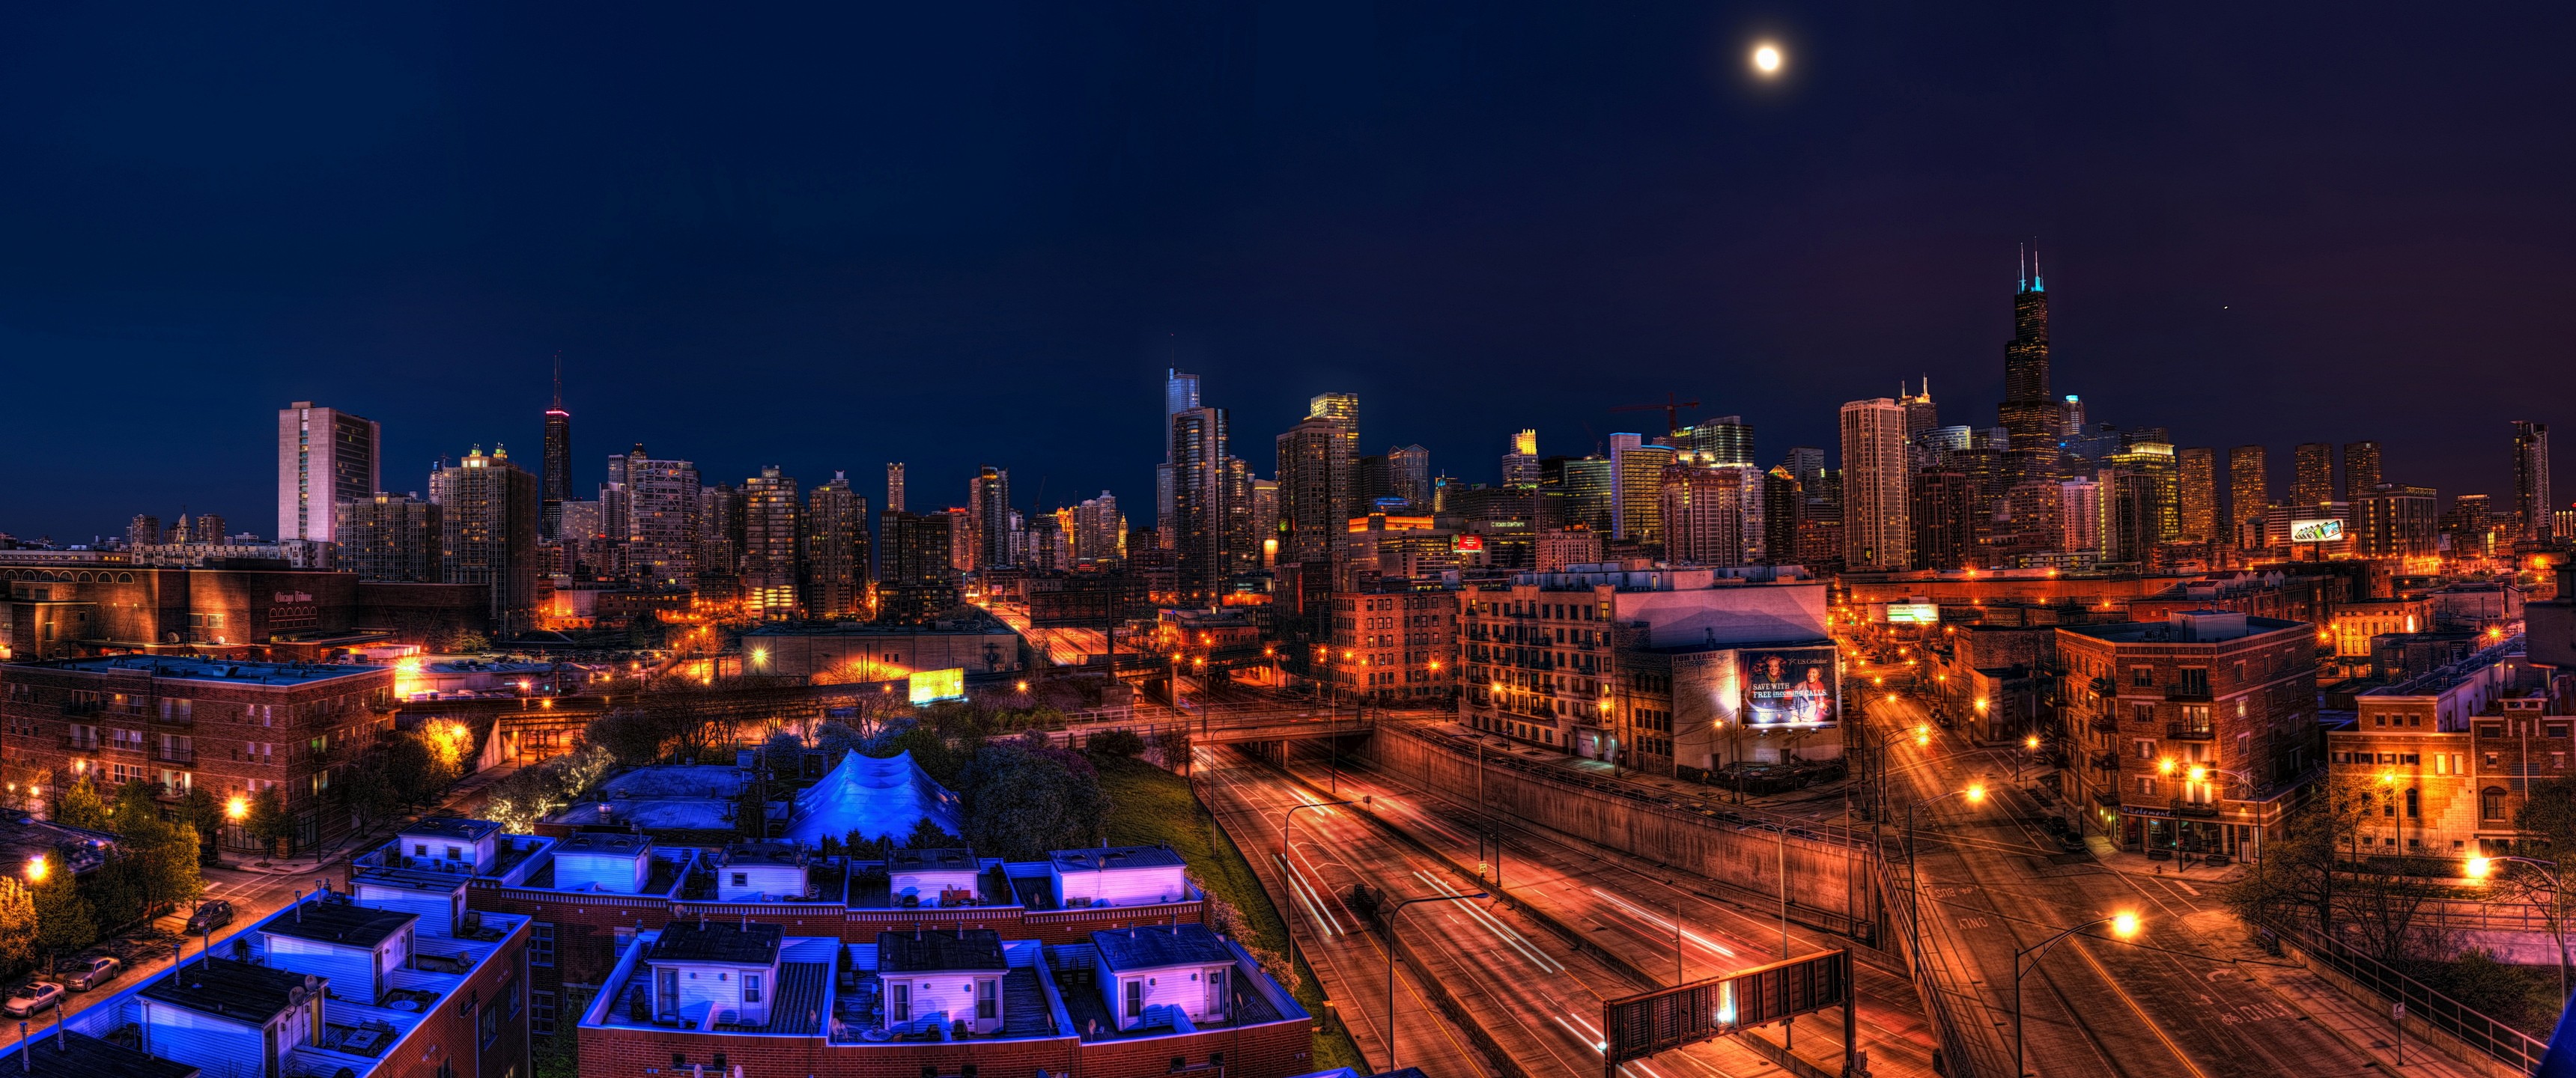 General 3440x1440 ultrawide night cityscape Chicago Illinois USA skyline low light HDR